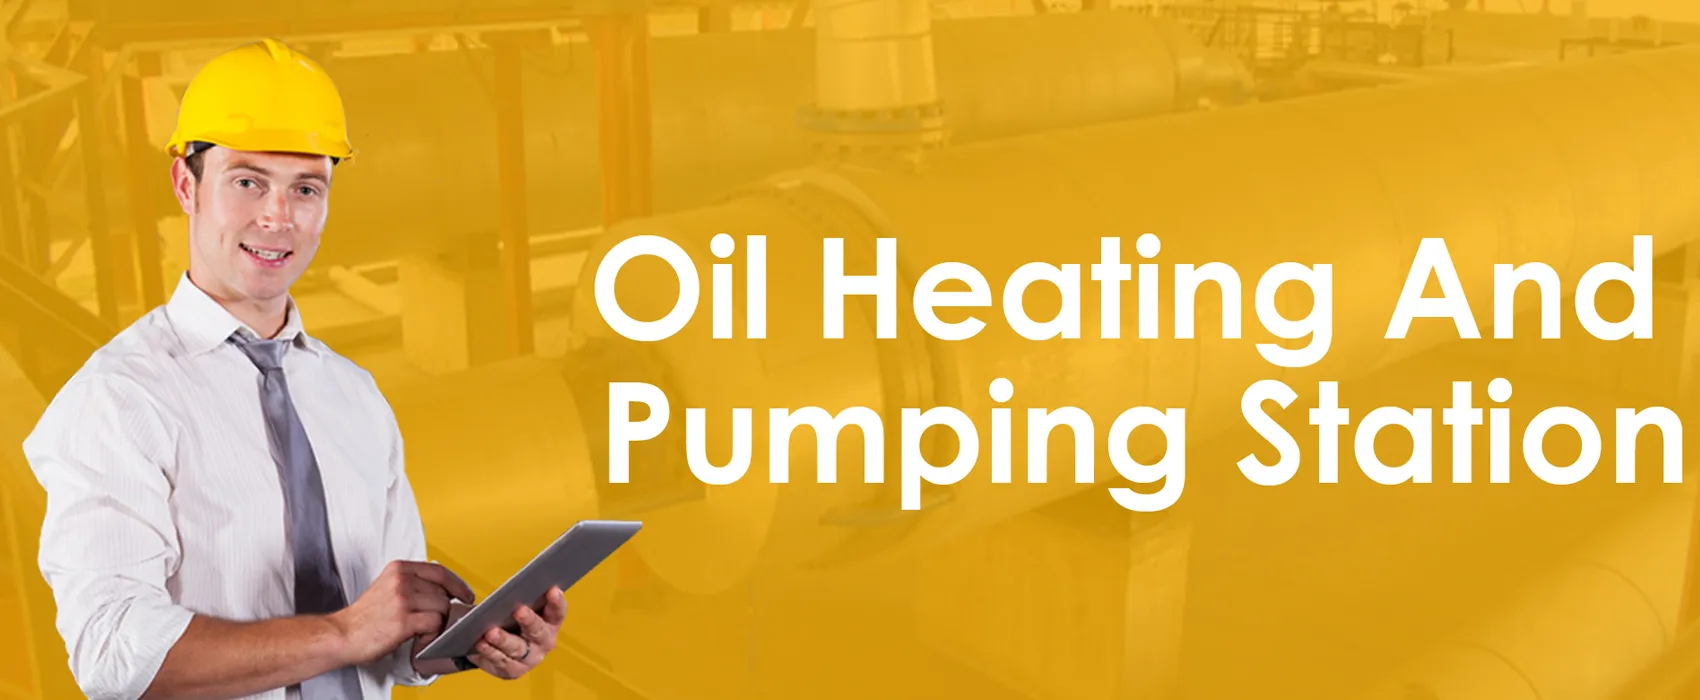 Oil Heating And Pumping Station